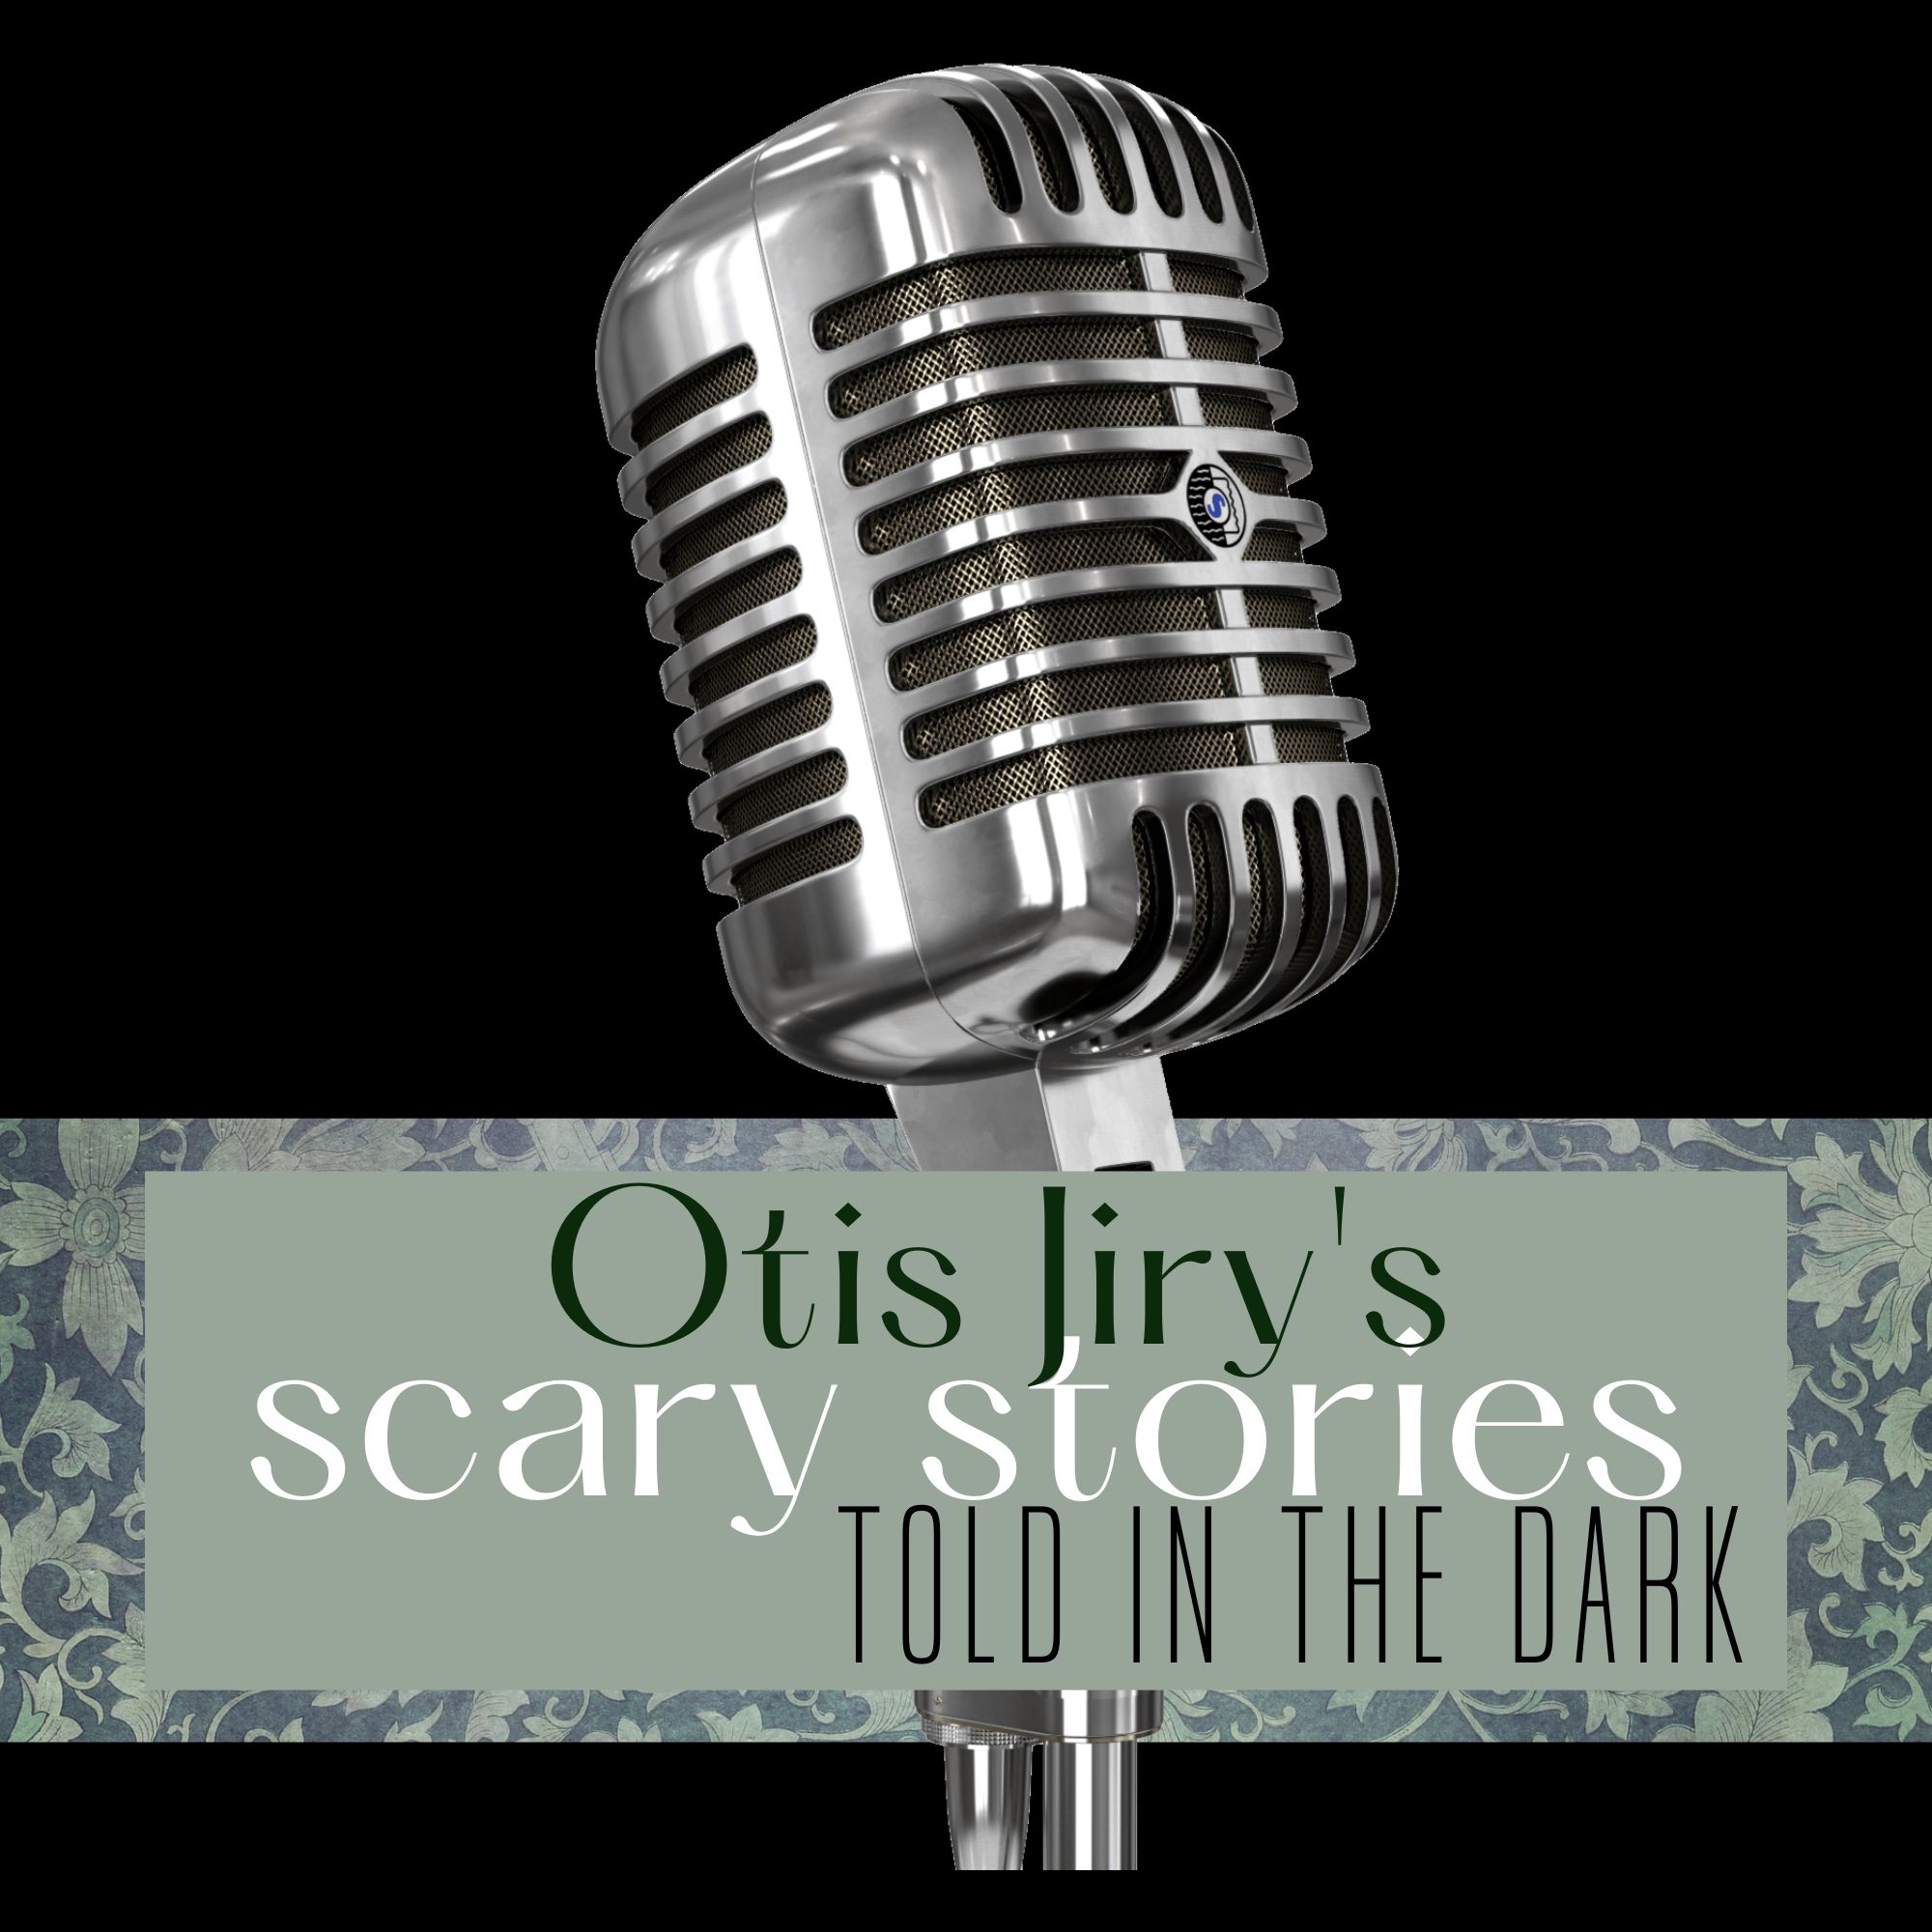 I’m Sharing a Podcast Series: Otis Jiry’s Scary Stories Told in the Dark